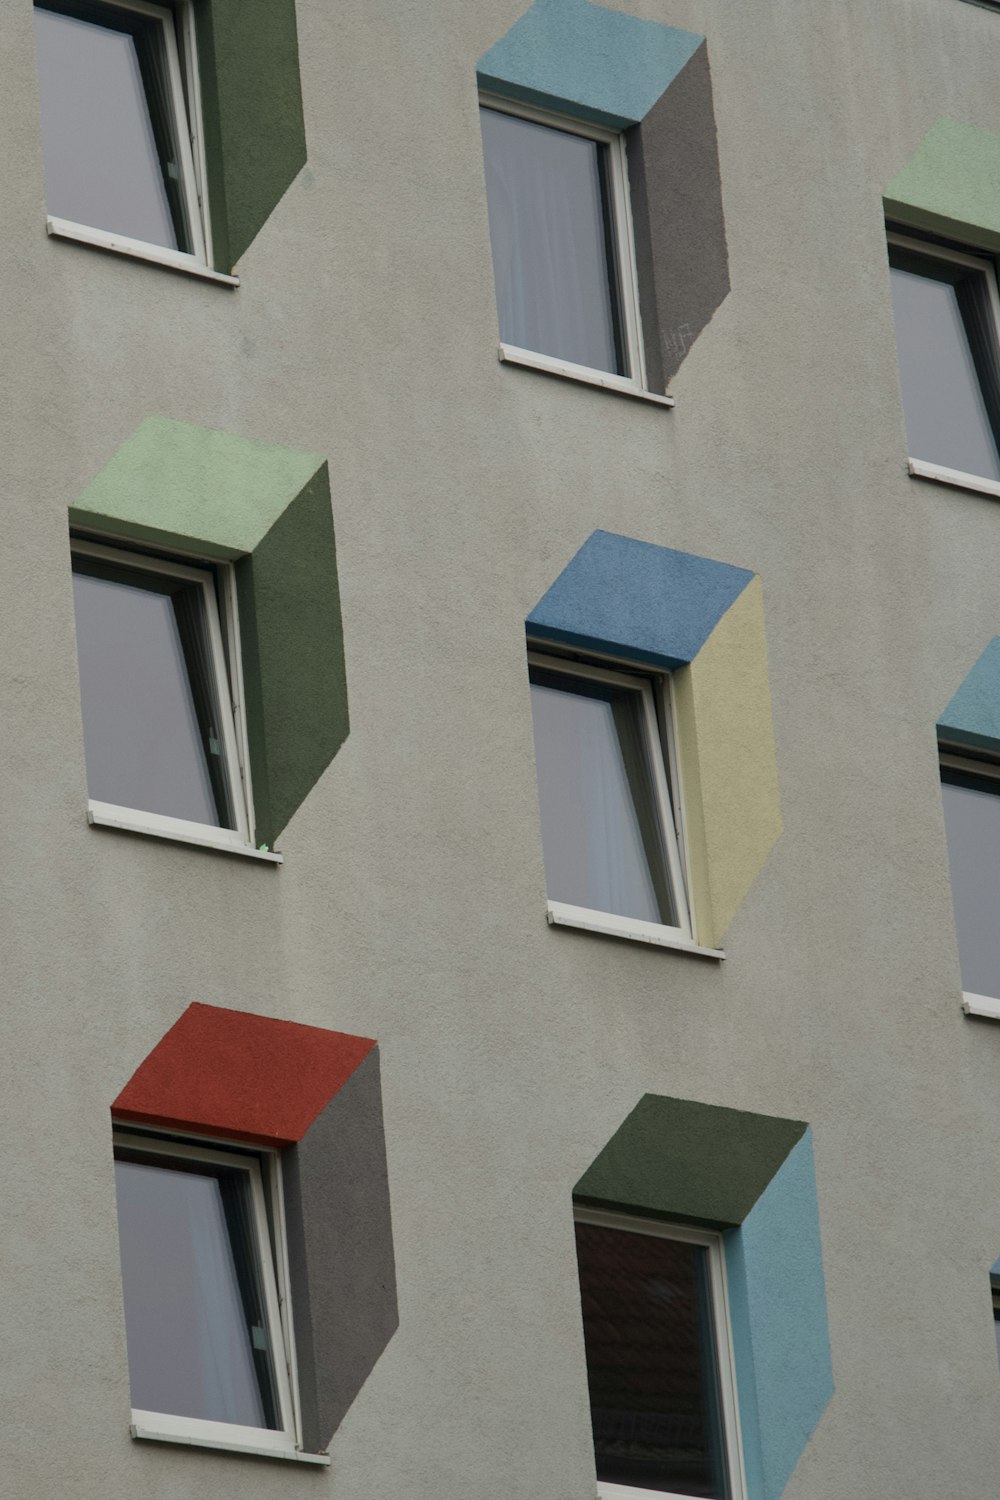 a multicolored building with several open windows